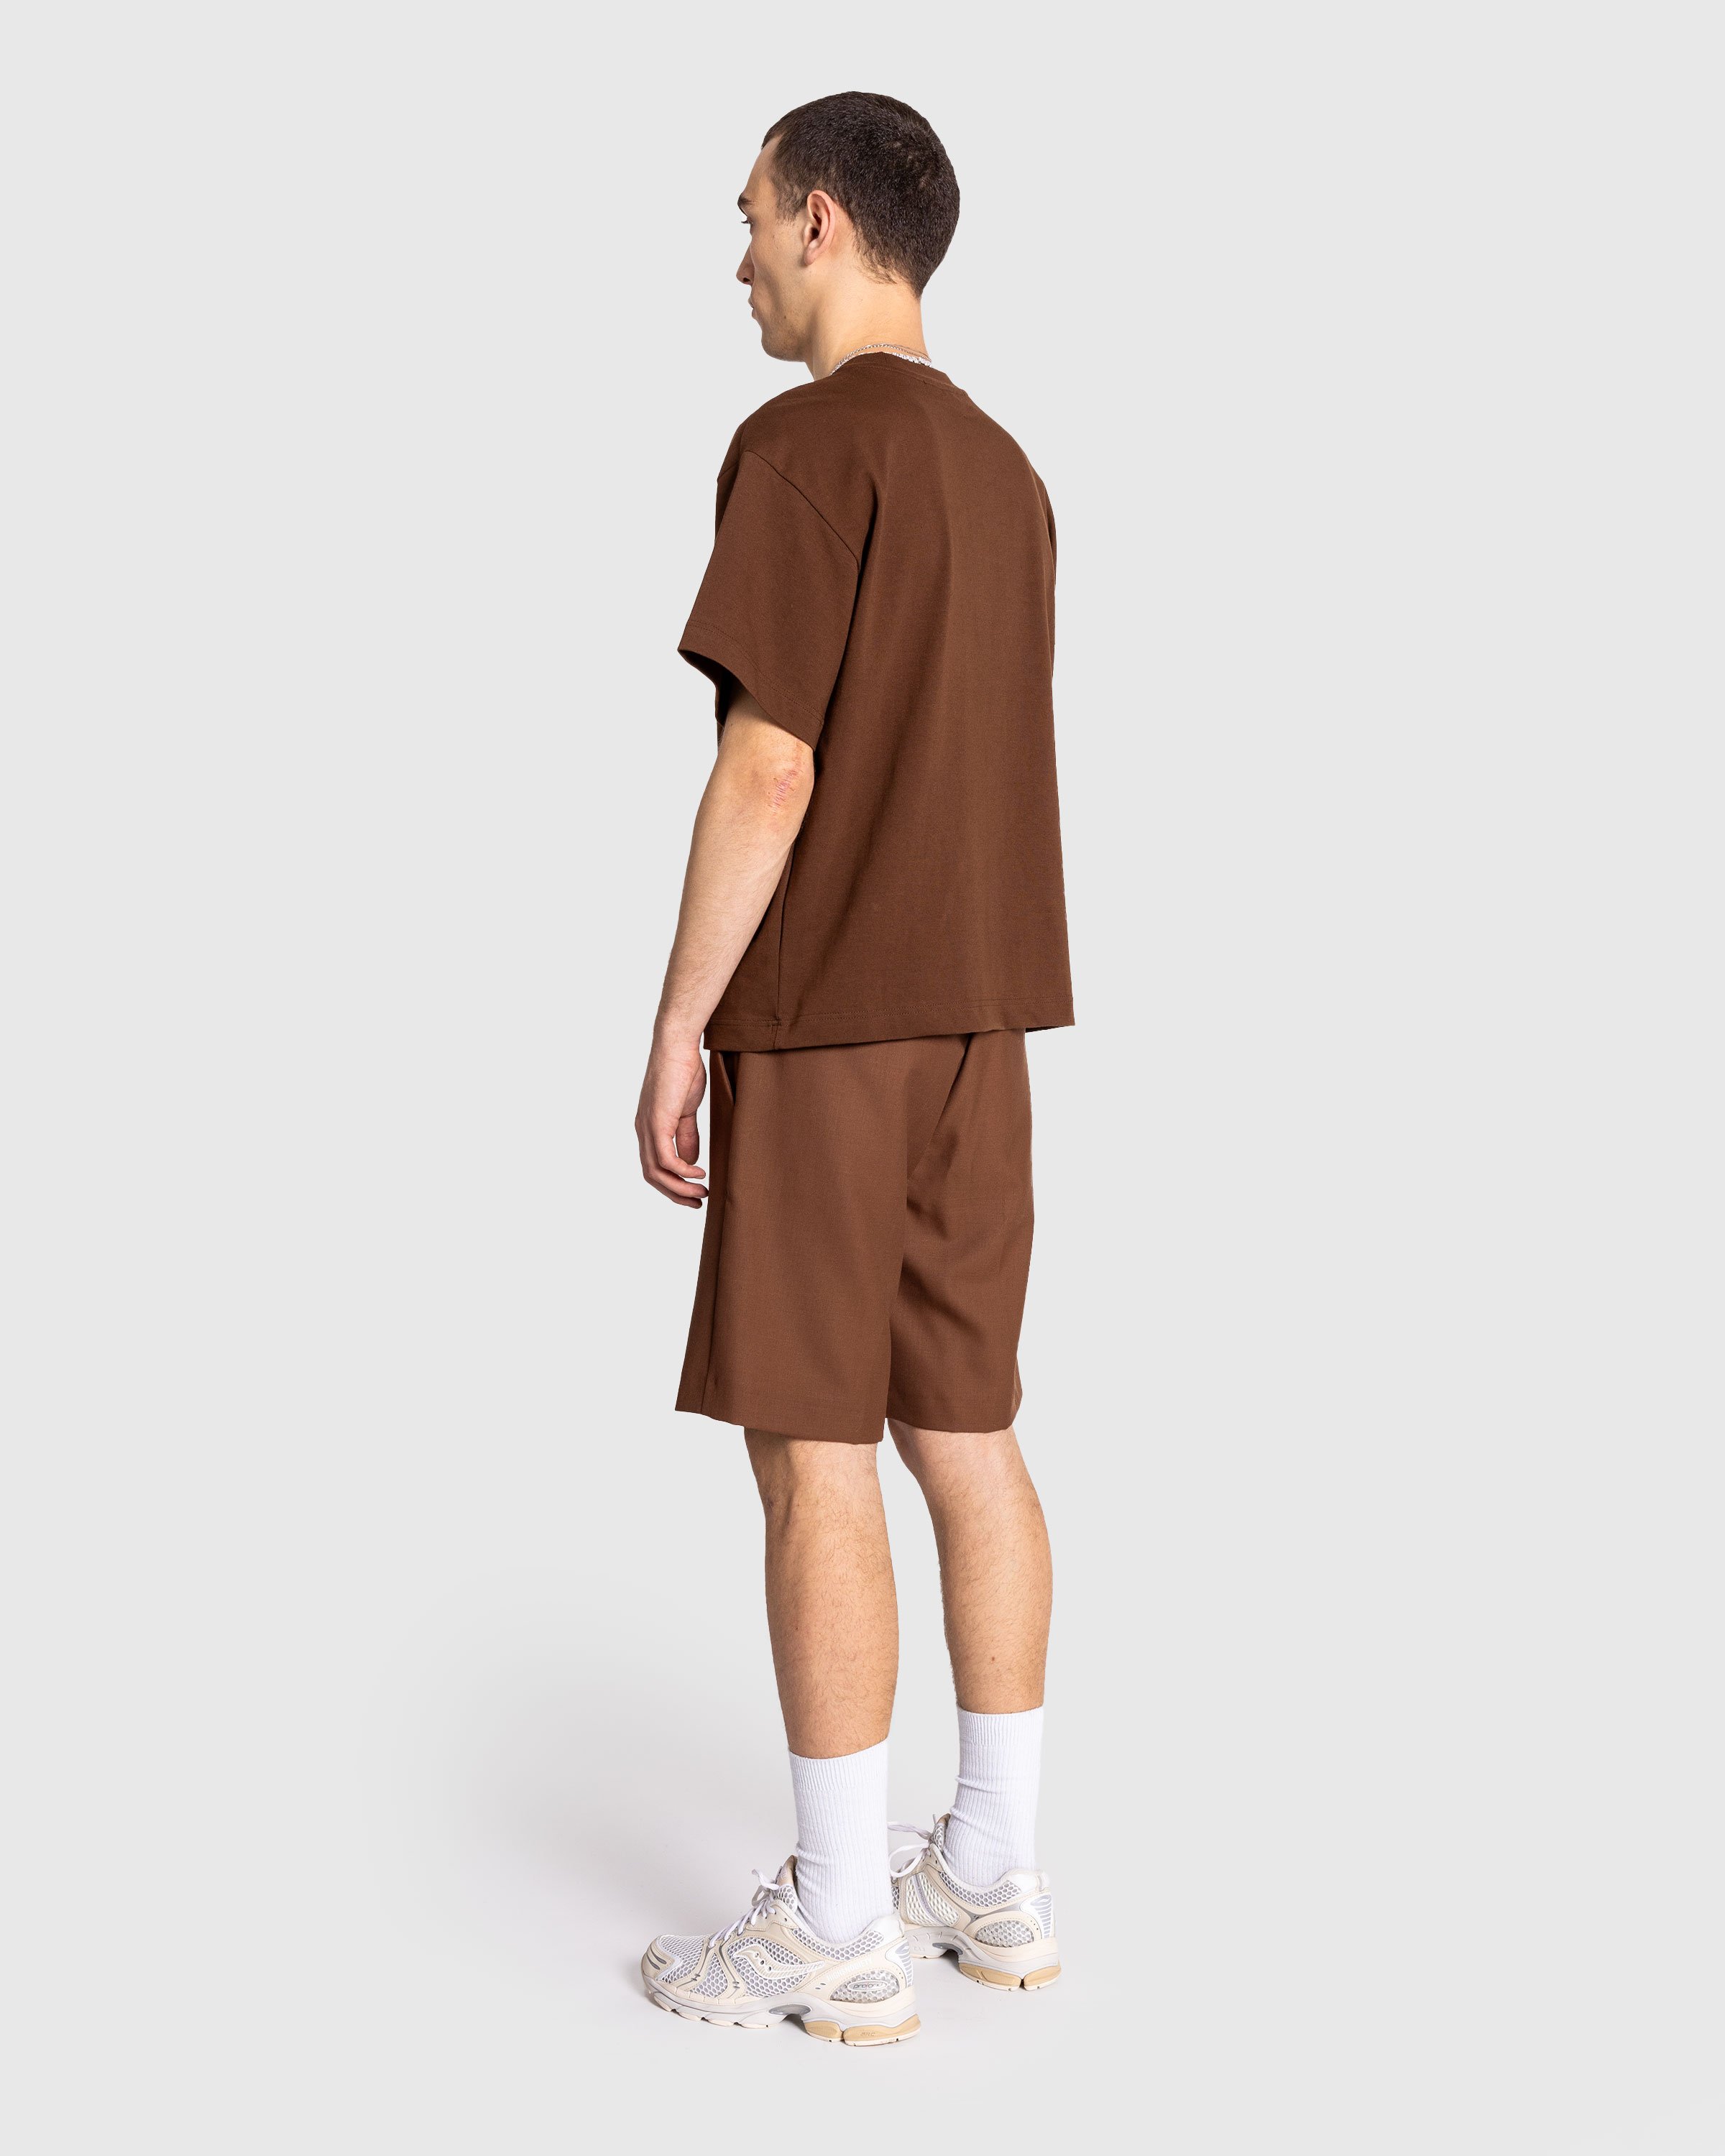 Séfr - ATELIER TEE HEAVY BROWN COTTON - Clothing - Brown - Image 4